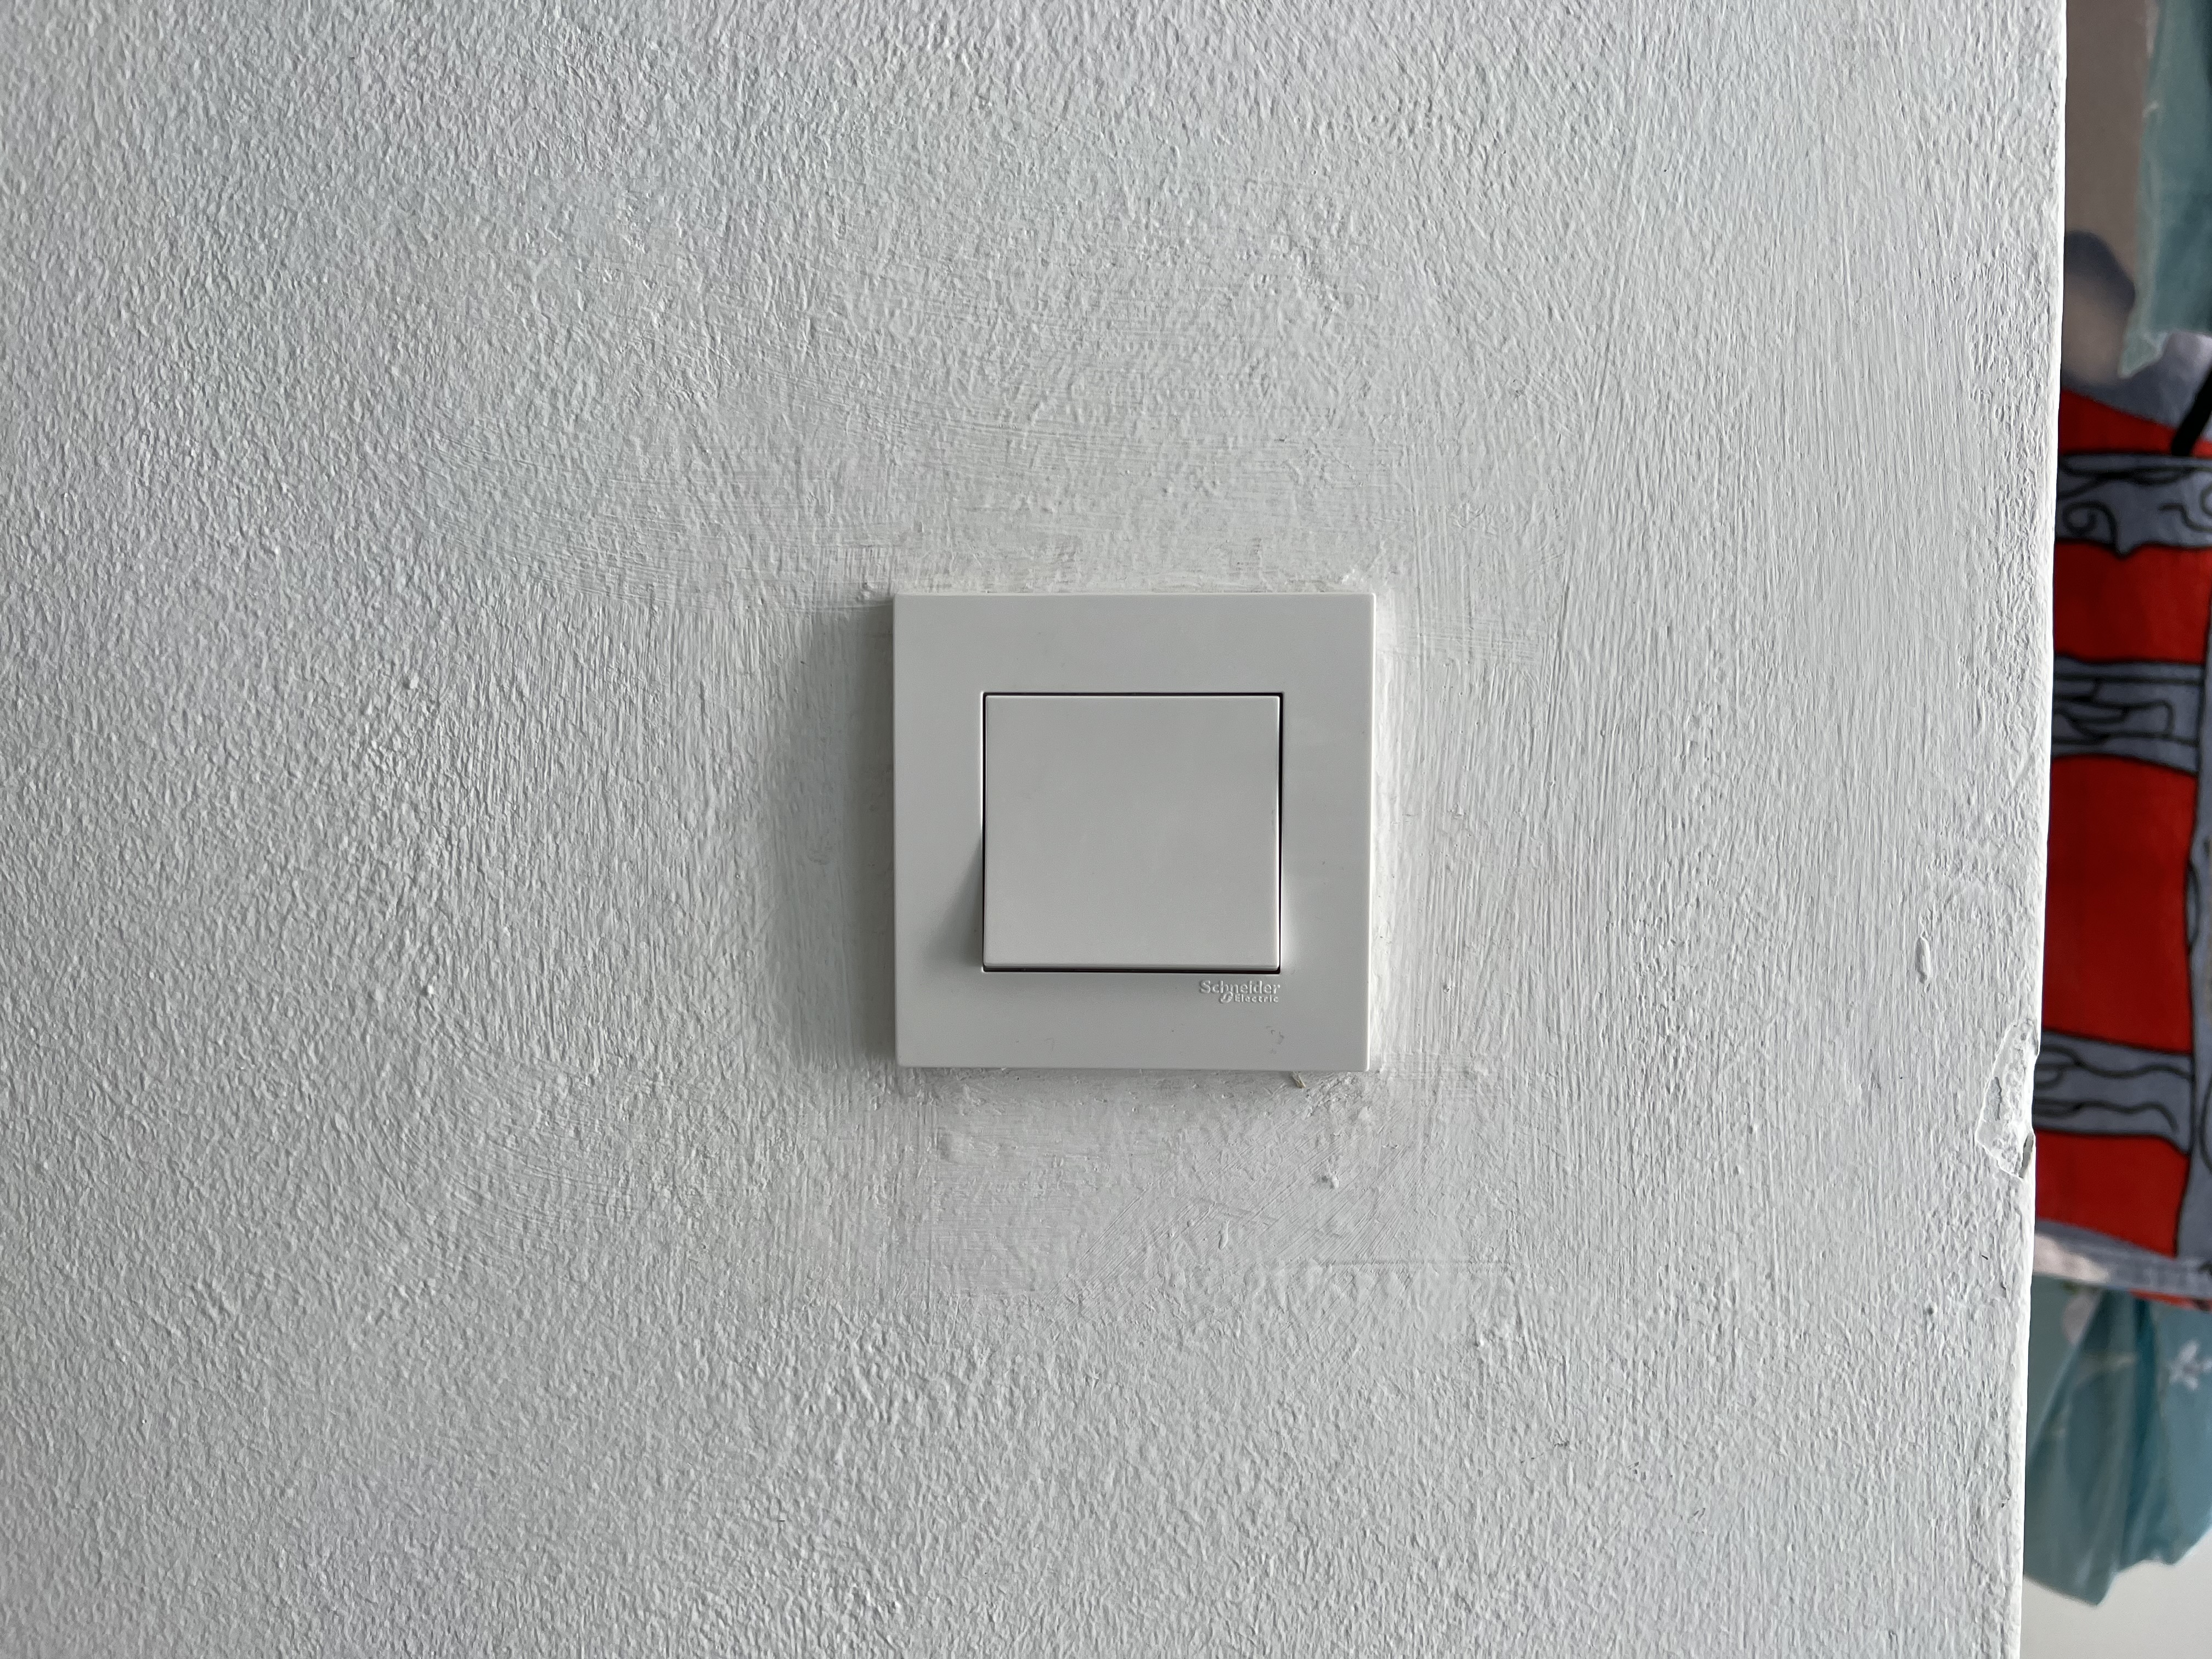 A simple one-gang light switch that we replaced